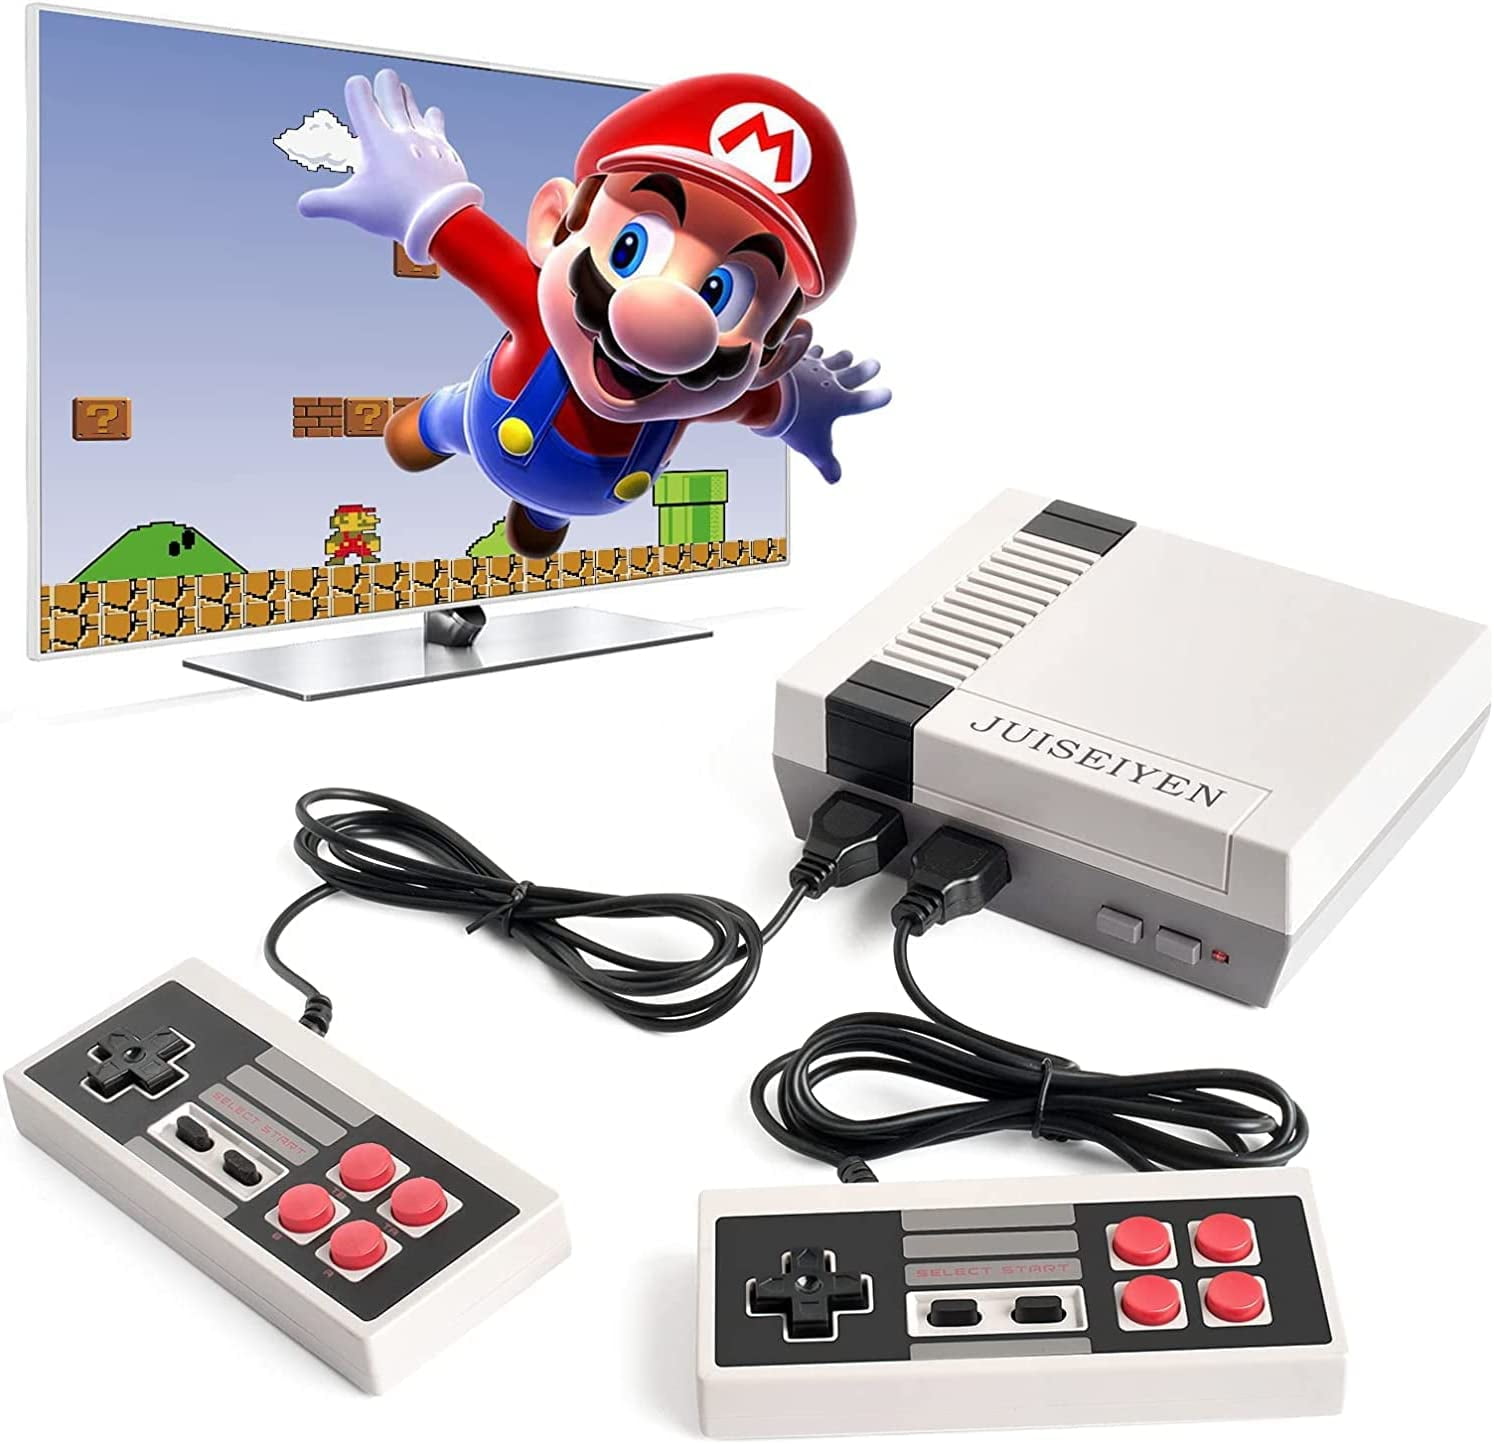 Classic Edition Mini Retro Game Console,AV plus HDMI Output Plug & Play  Classic Mini Video Games, Built-in 620 Games with 2 Classic Controllers